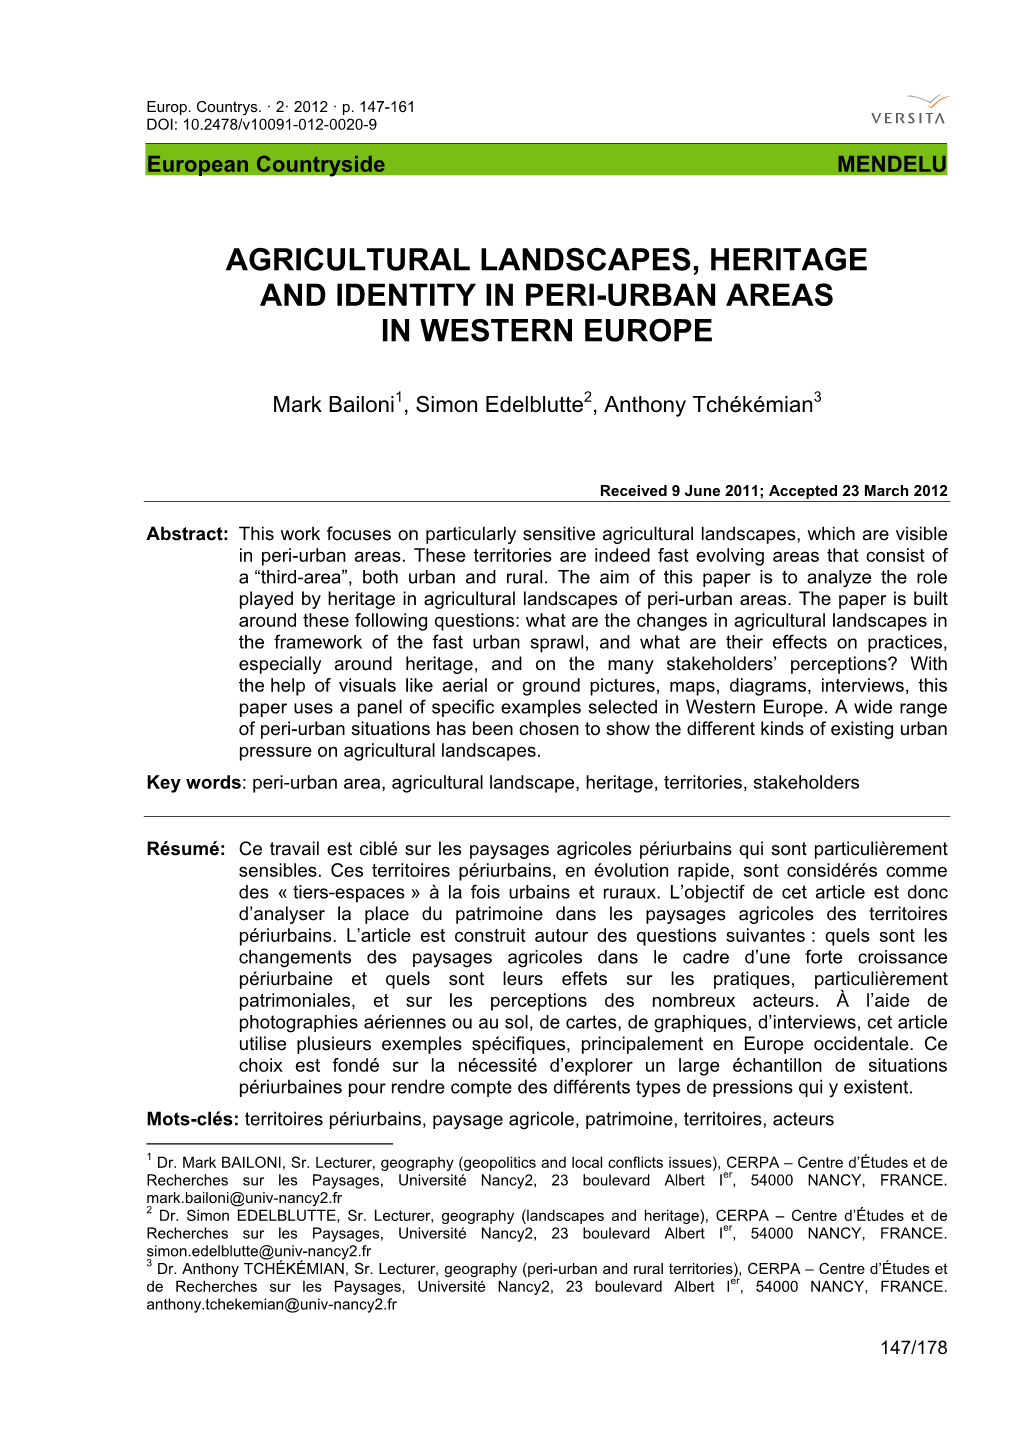 Agricultural Landscapes, Heritage and Identity in Peri-Urban Areas in Western Europe